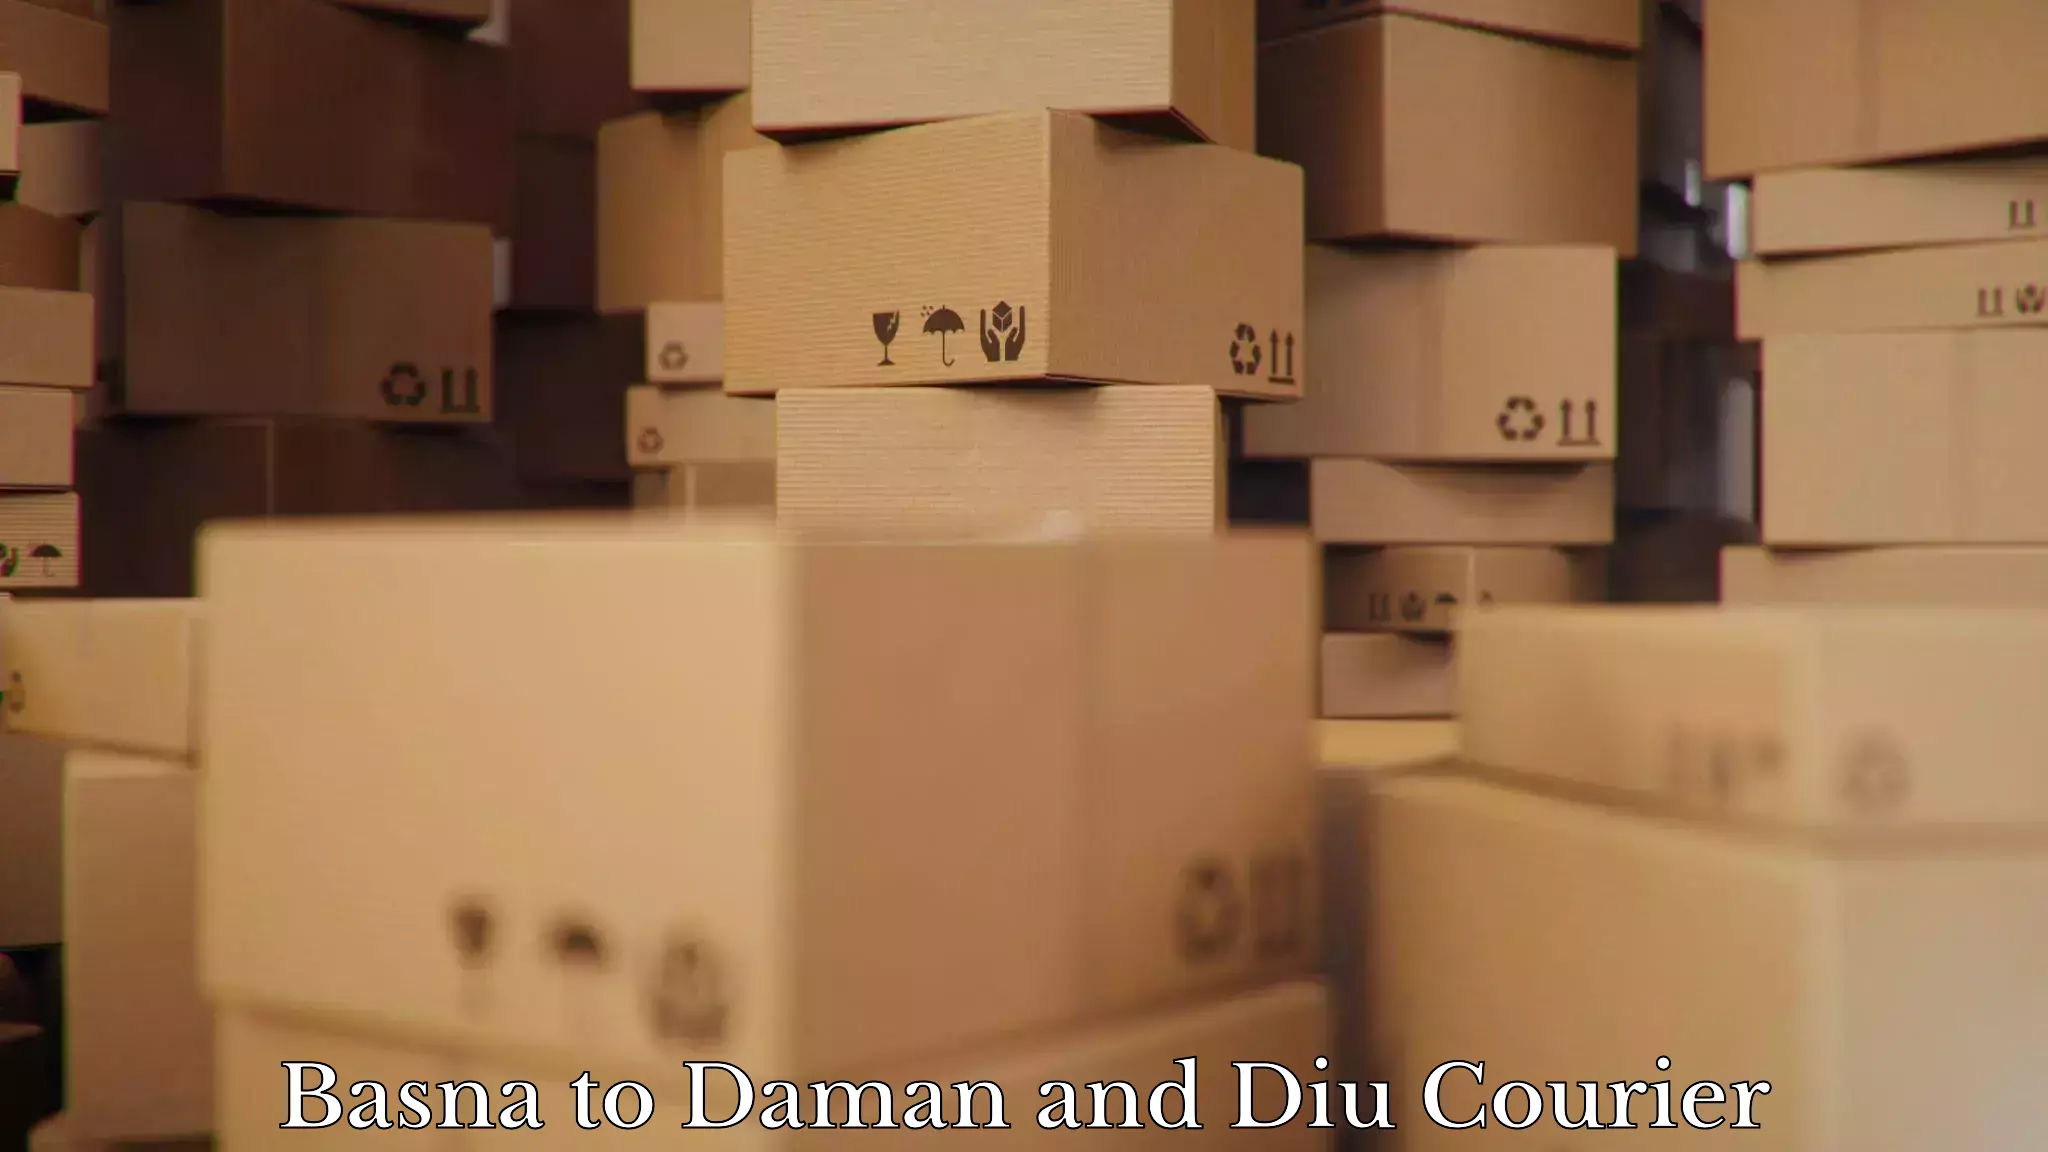 Efficient moving company Basna to Daman and Diu